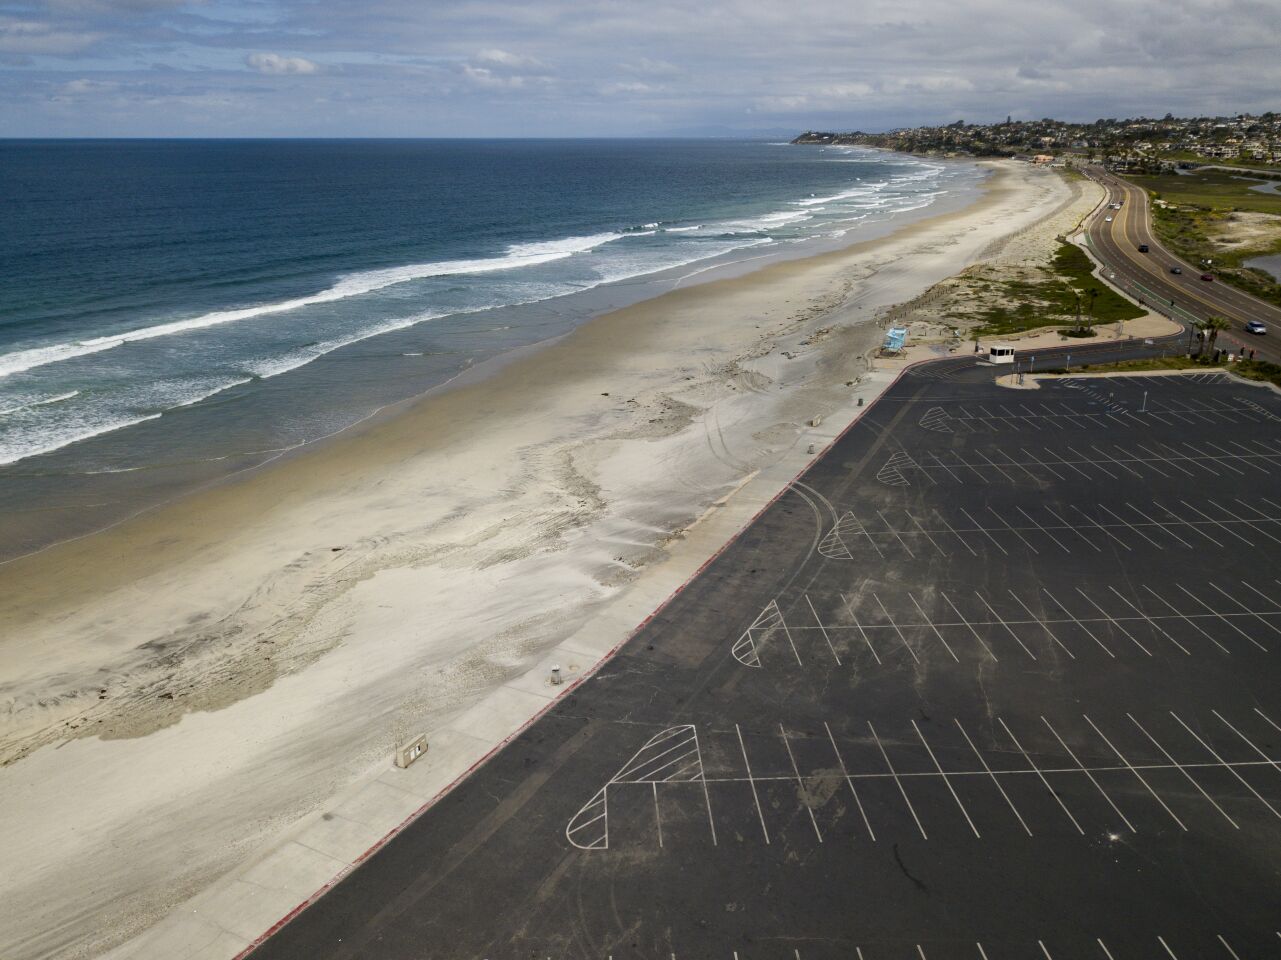 Seaside Reef in Cardiff State beach sits empty on April 5, 2020. All beaches in San Diego County have been closed due to COVID-19.